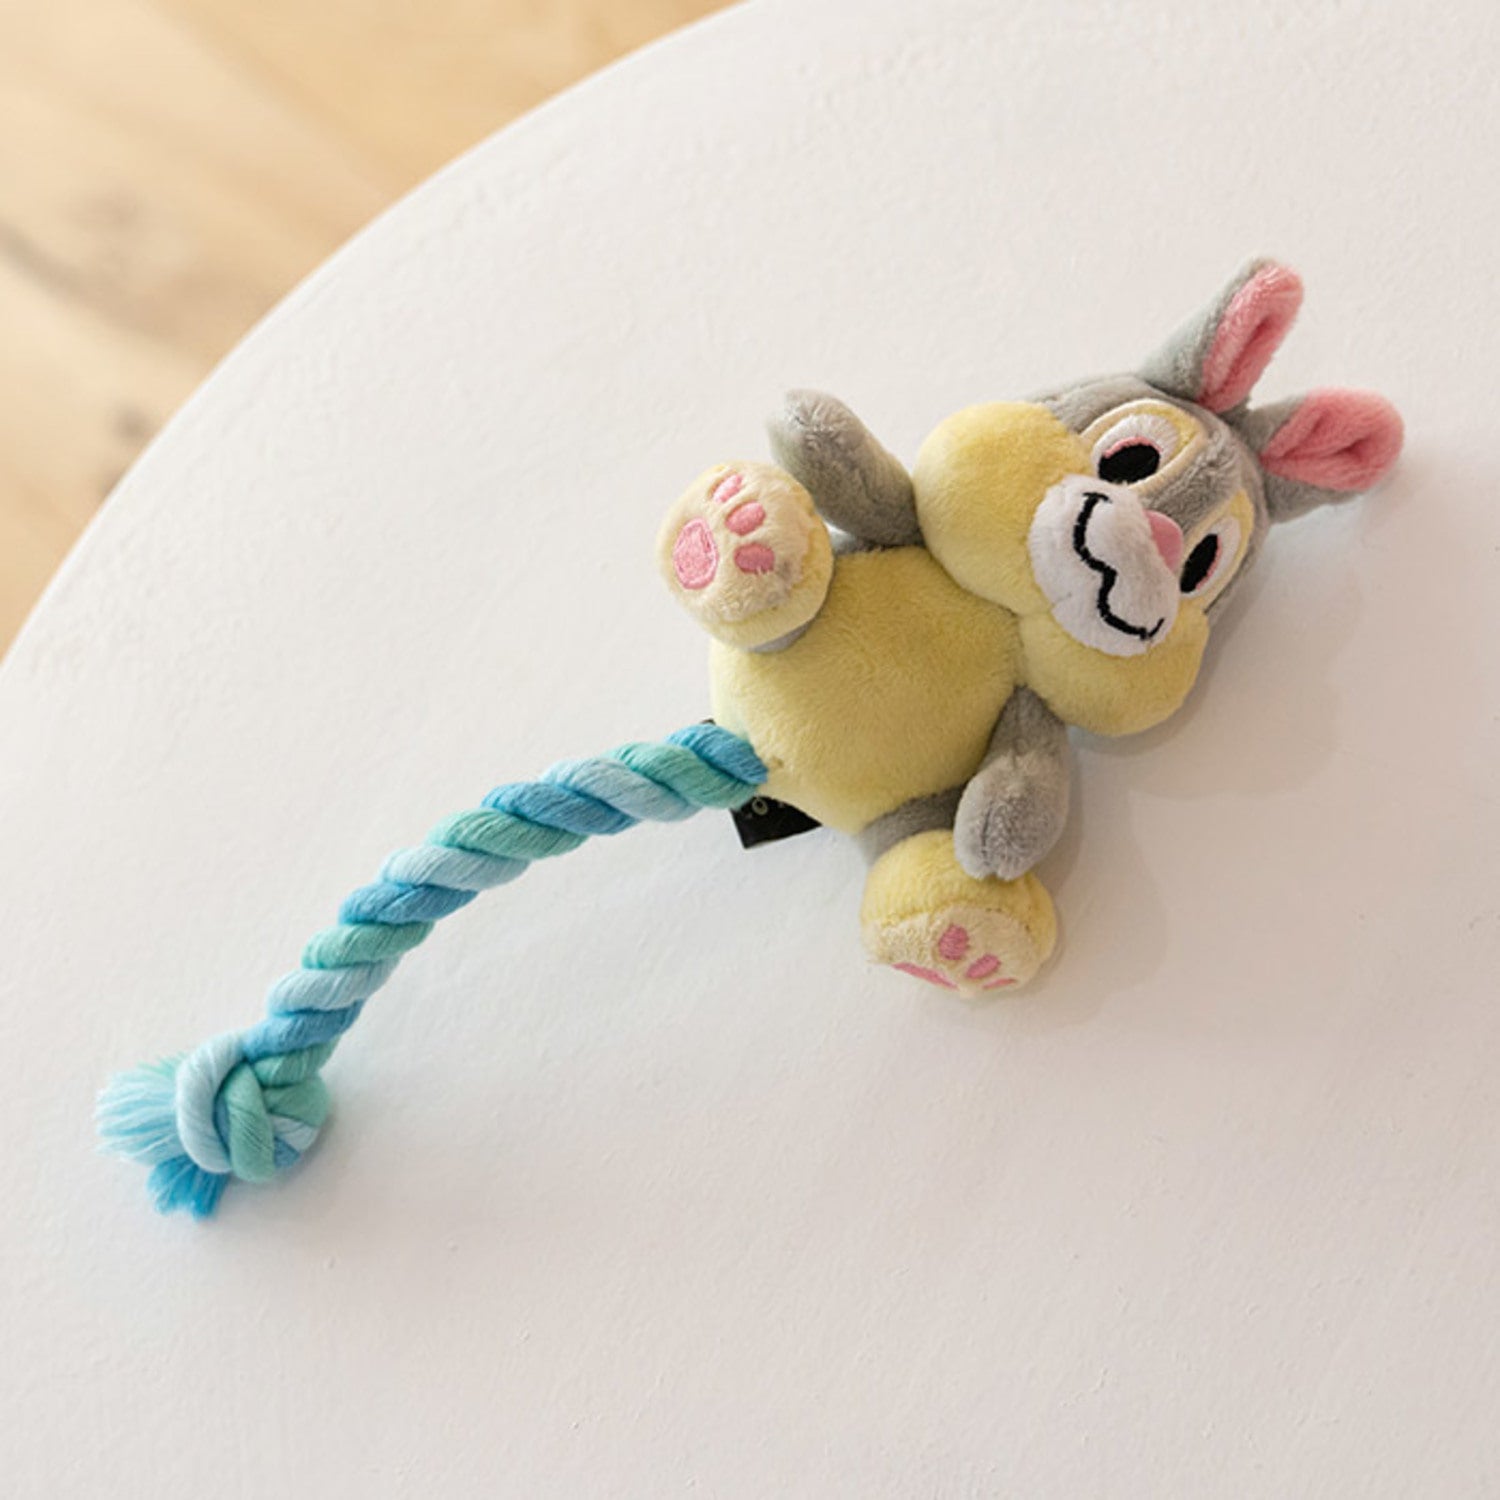 Disney Rope Toy - Thumper